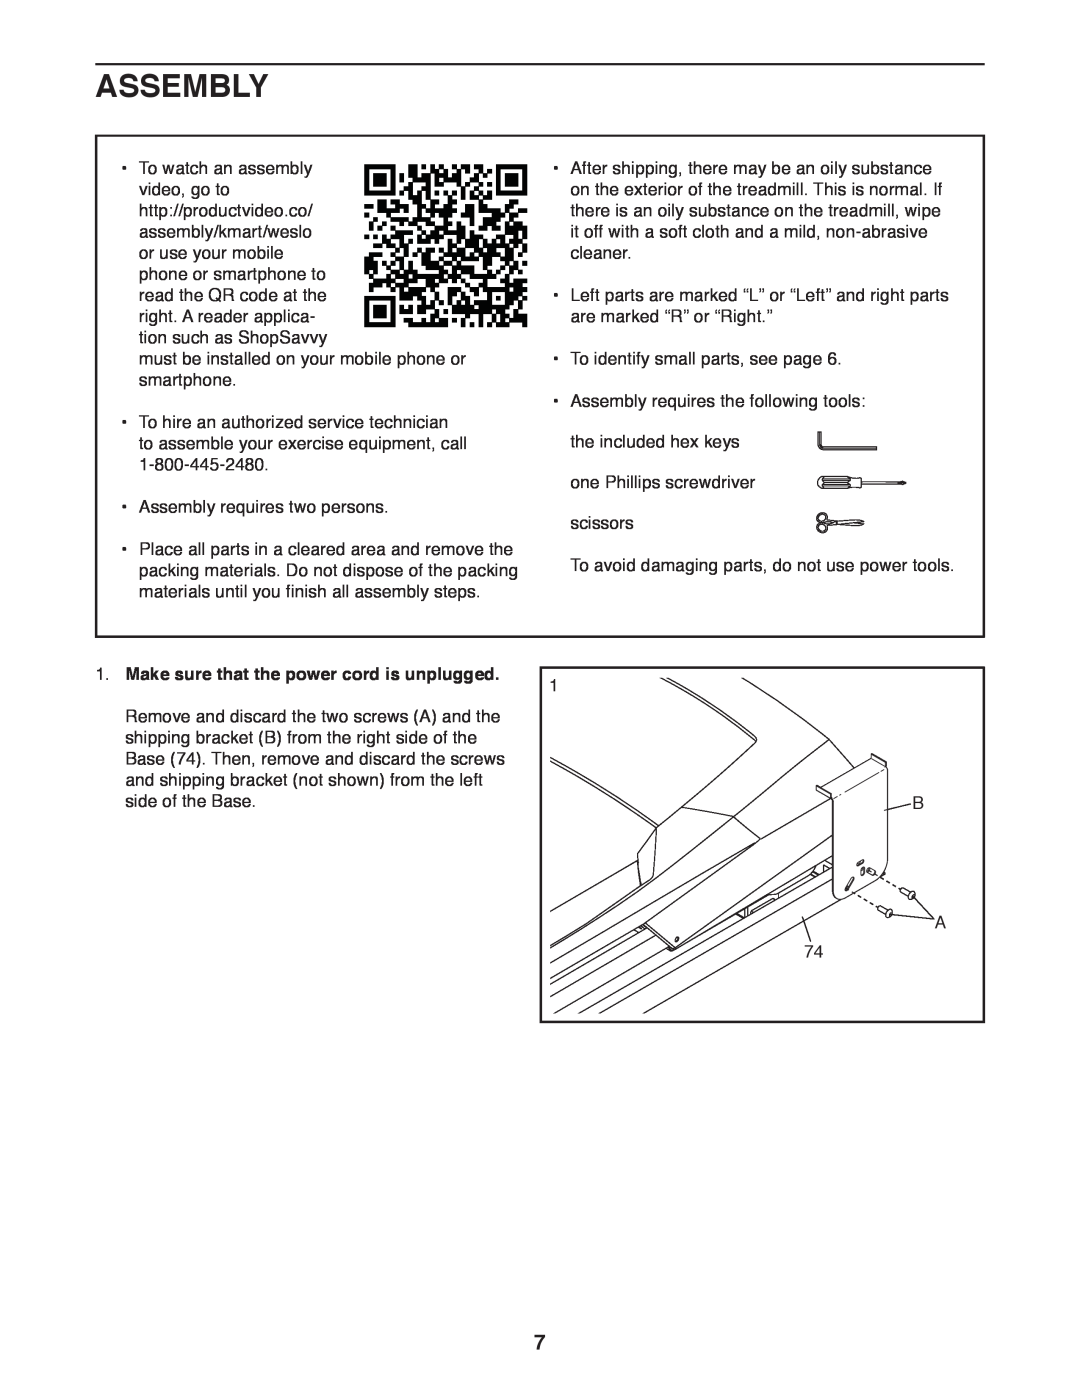 Weslo WLTL39312.0 user manual Assembly, Make sure that the power cord is unplugged 